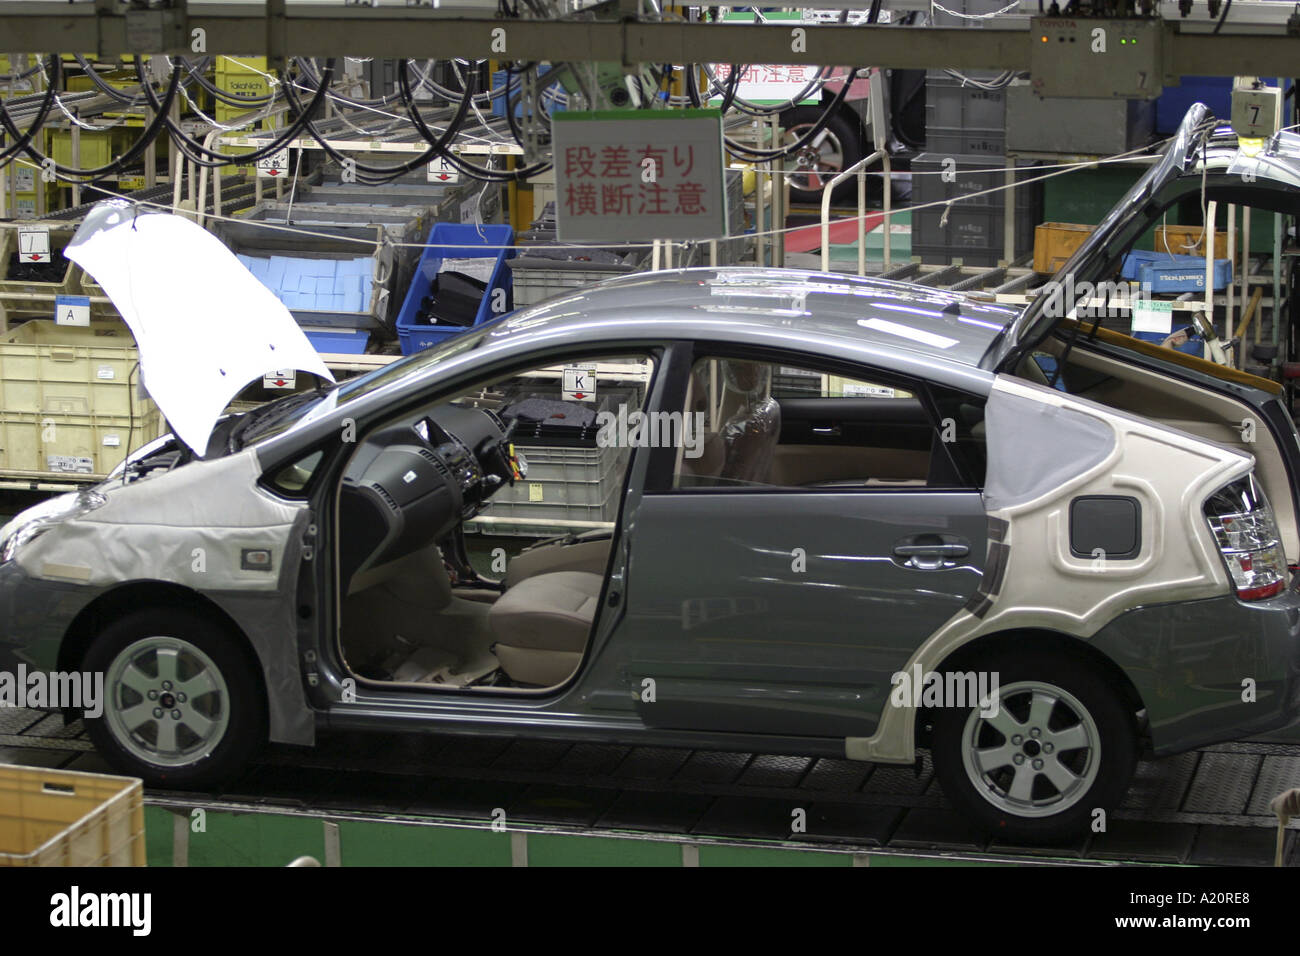 A Toyota Prius hybrid car being assembled on the production line at the Tsutsumi factory in Toyota City, Nagoya, Japan Stock Photo